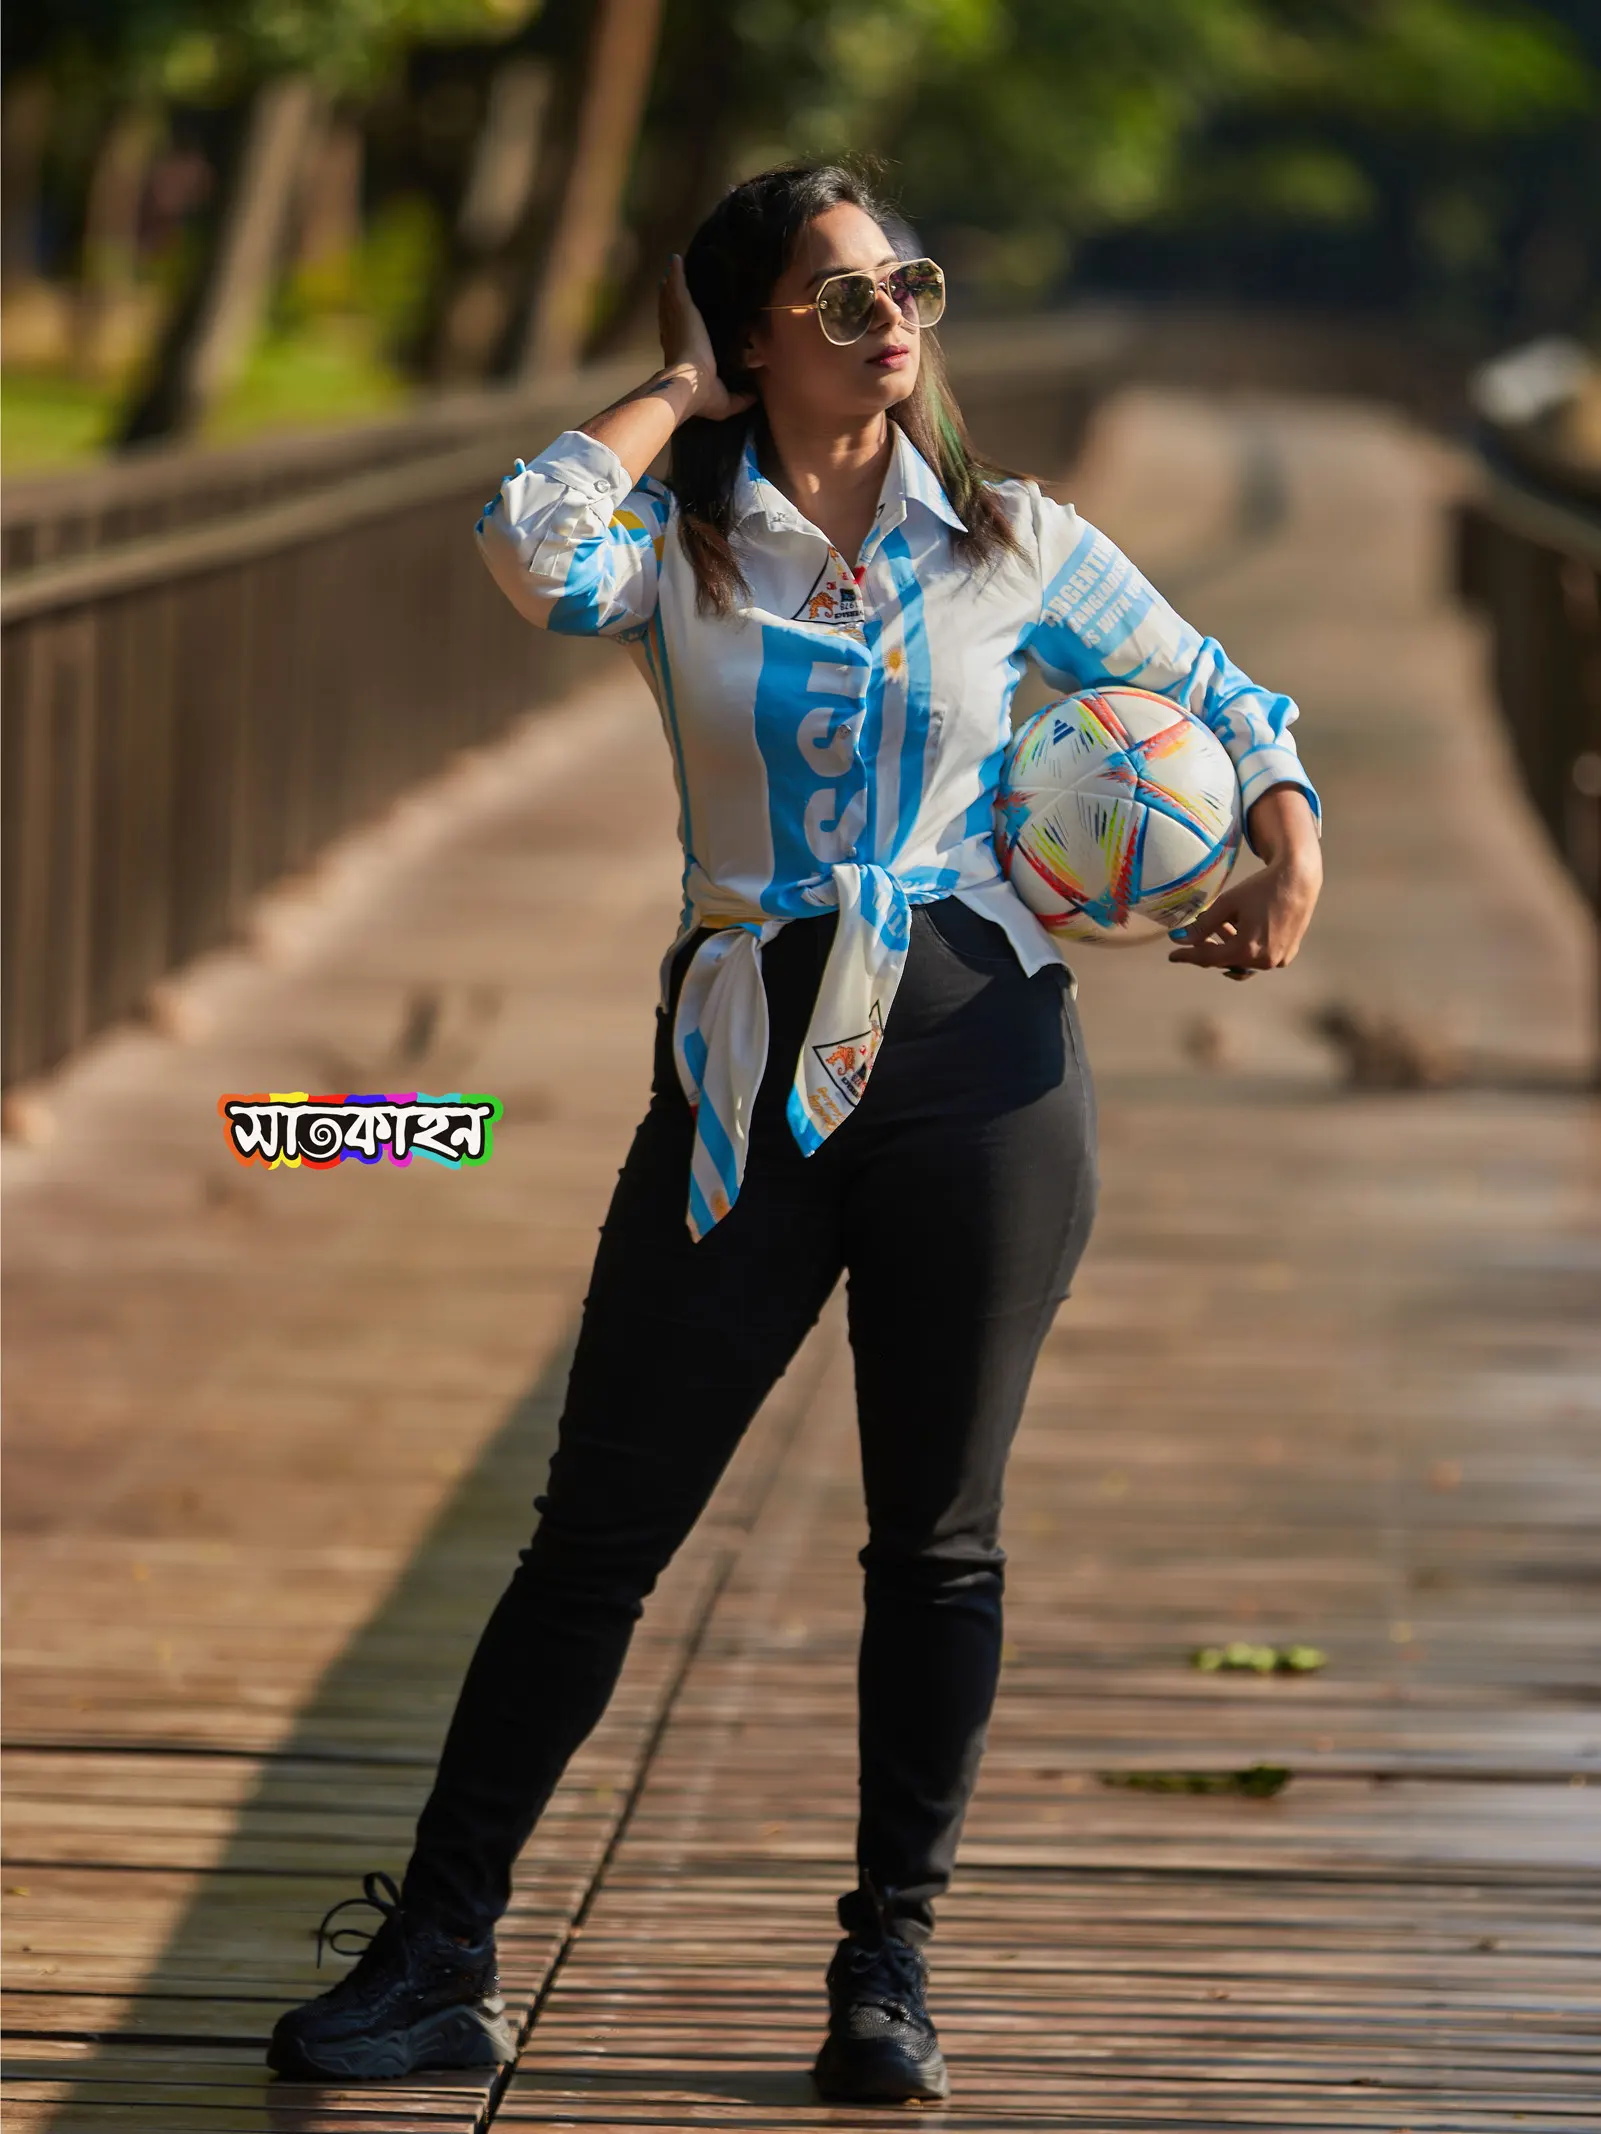 World cup special argentina trendy shirt